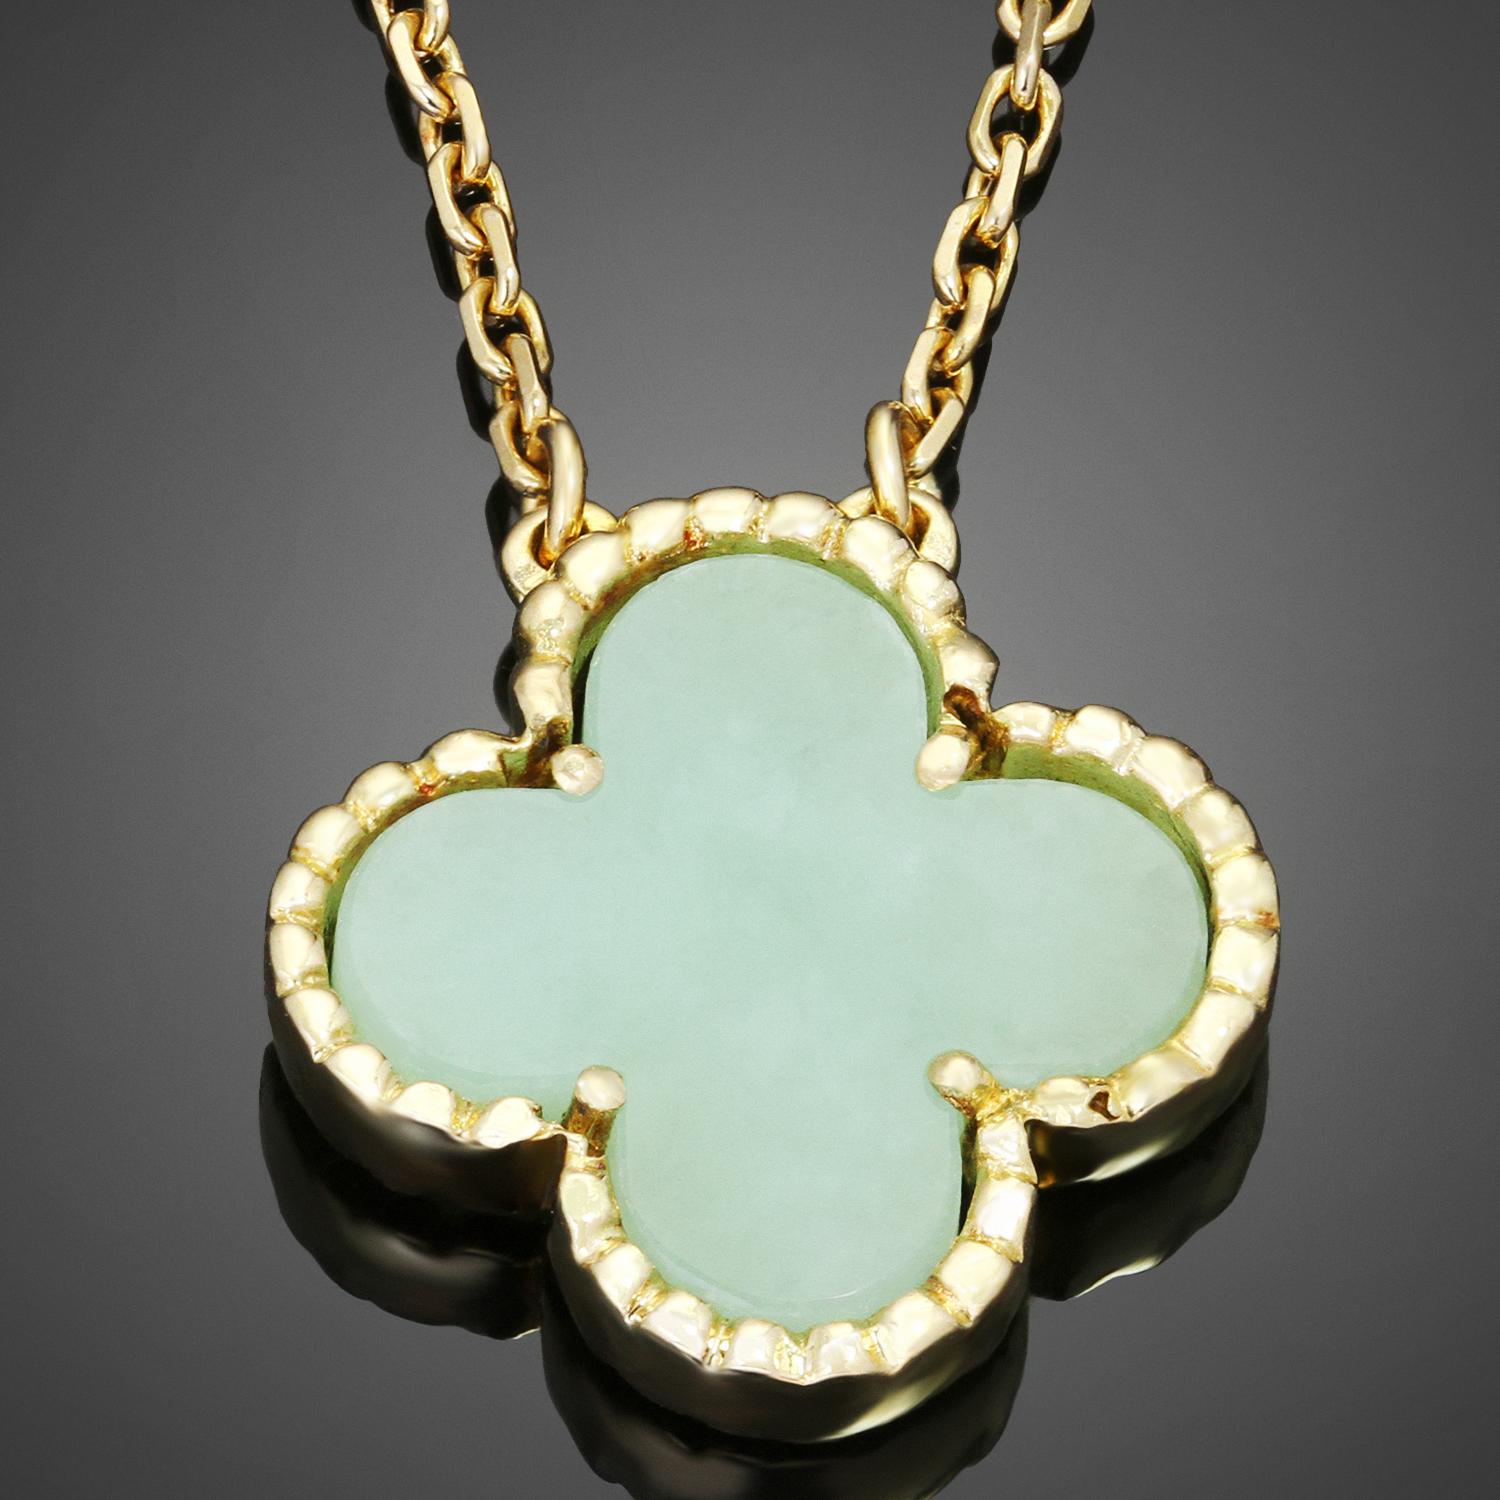 This fabulous rare necklace from the Vintage Alhambra collection by Van Cleef & Arpels features green jade pendant with beaded edges set in 18k yellow gold. An iconic and festive design inspired by the symbol of luck. Made in France circa 2000s.